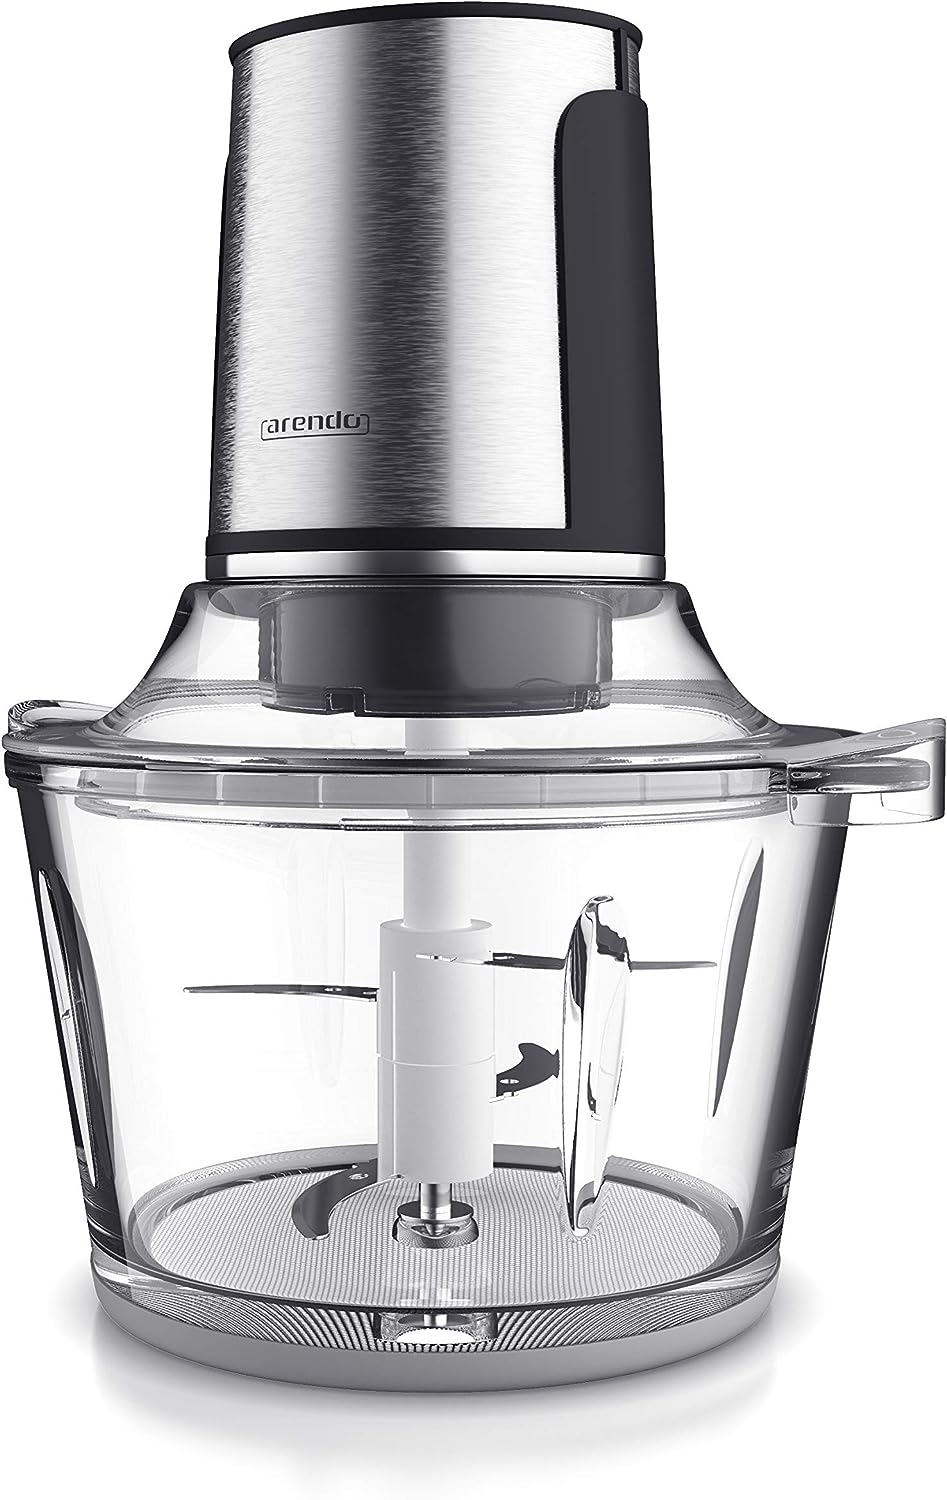 Arendo - Power chopper 400 watts with 1.5 litre glass container - Electric multi-chopper - Powerful universal chopper with 4 stainless steel blades - 2 speed settings - Power chopper